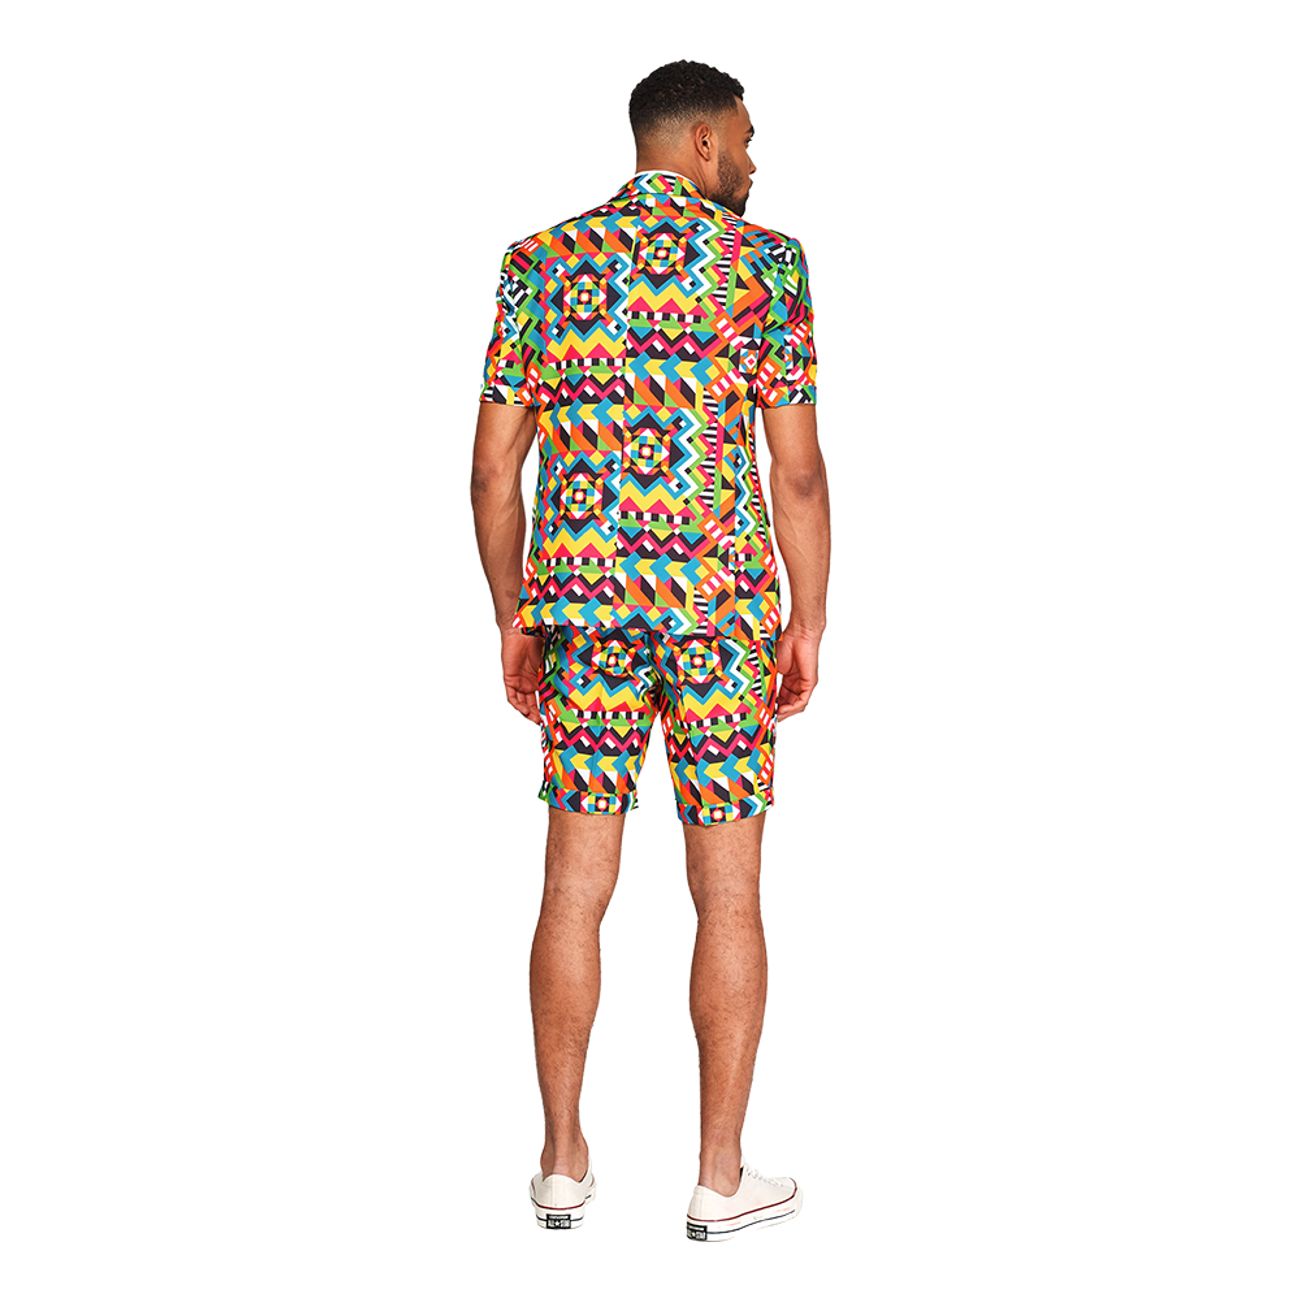 opposuits-abstractive-shorts-kostym-2